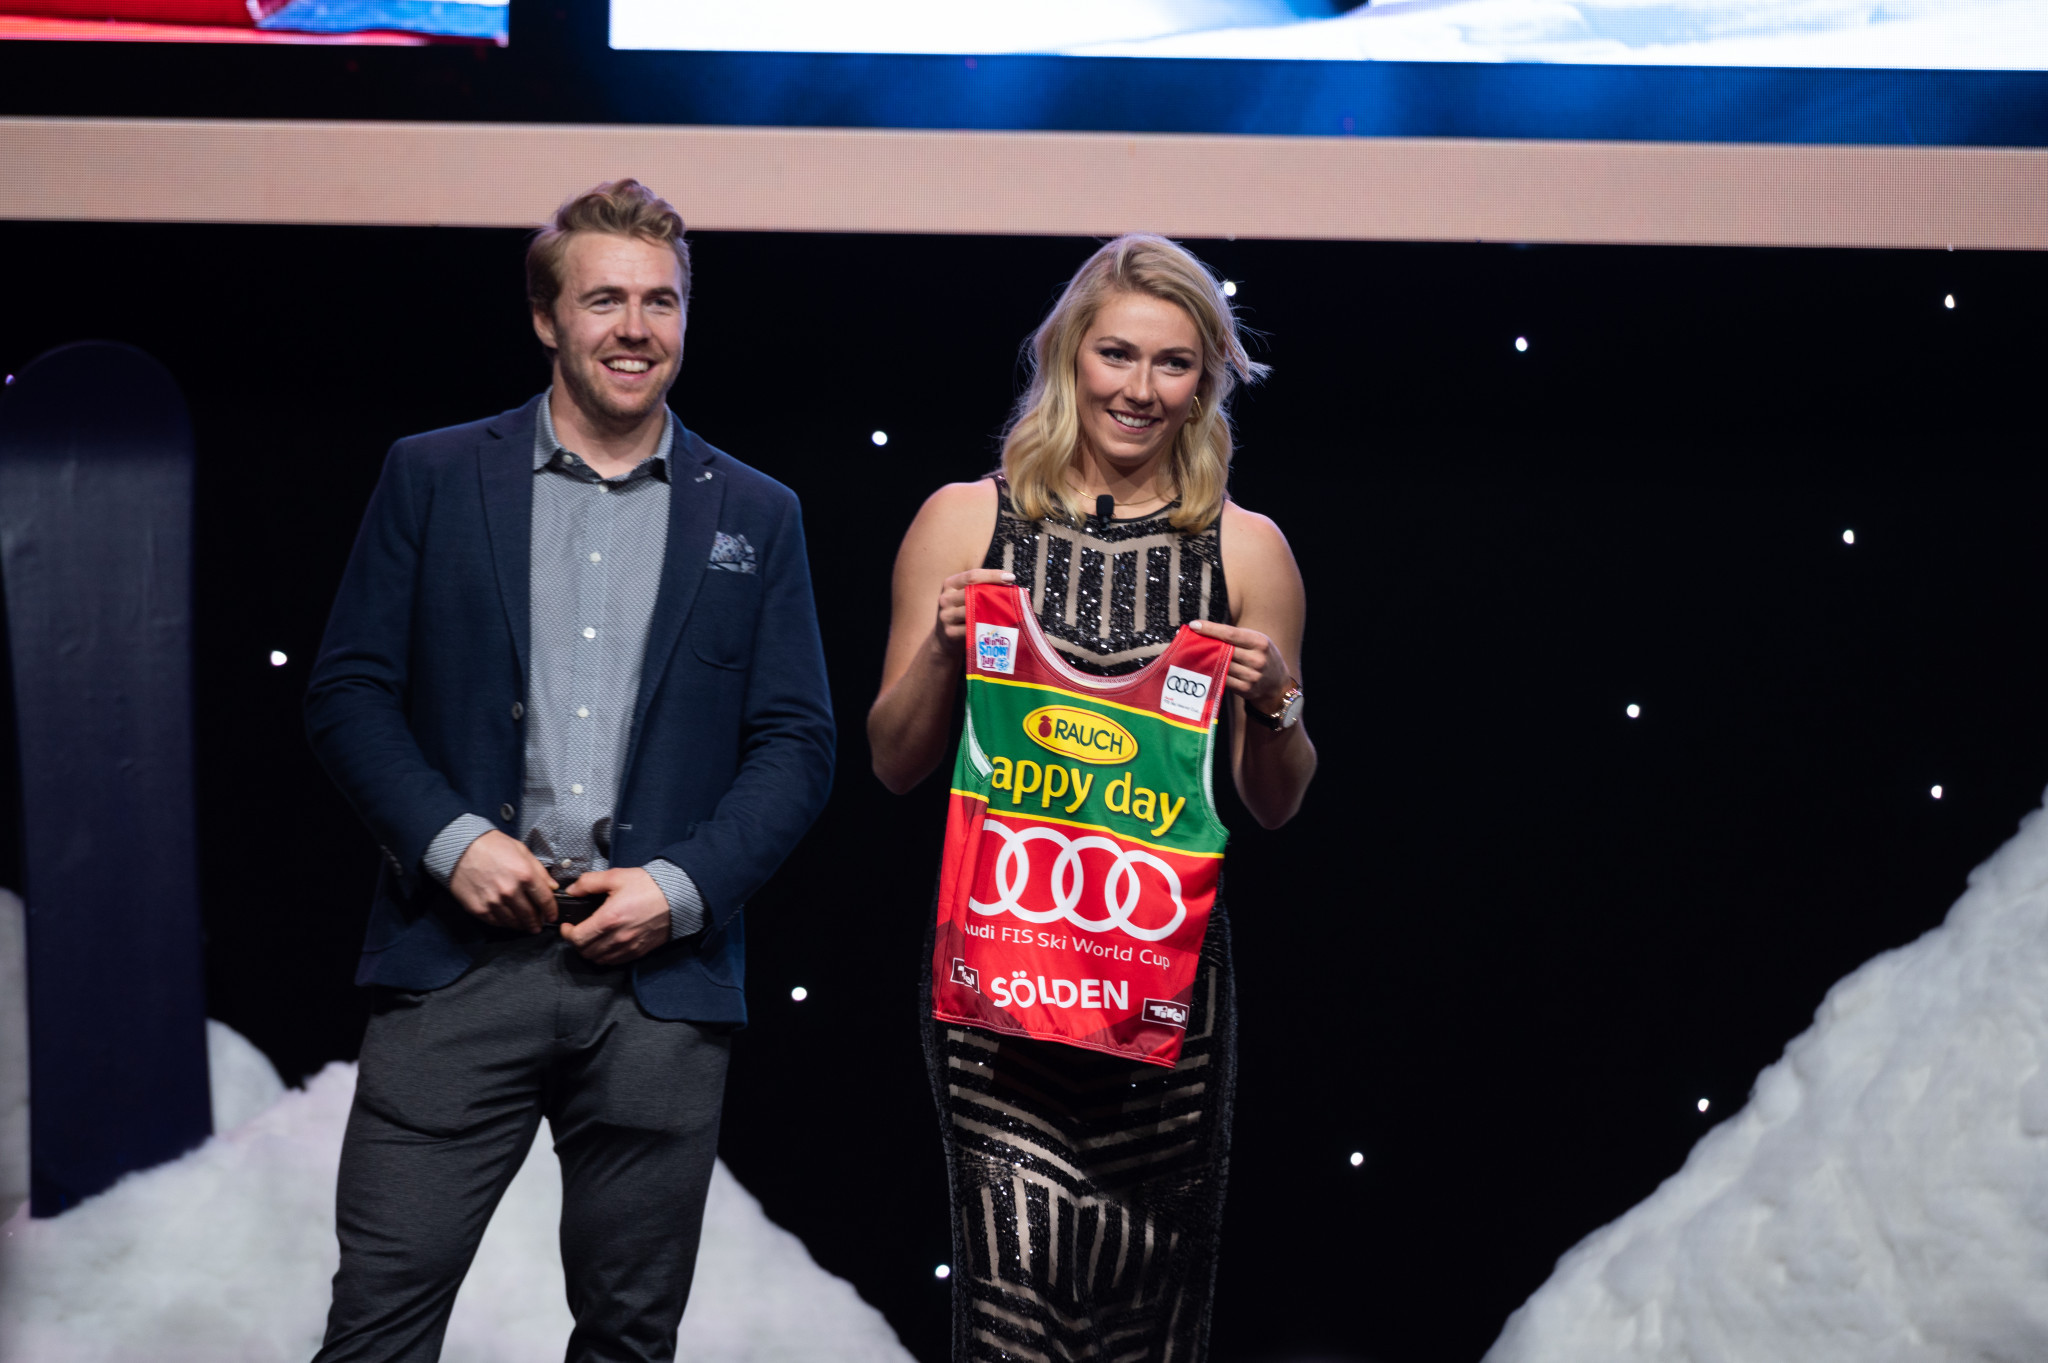 American Alpine skier Mikaela Shiffrin, right, auctioned her giant slalom leader bib from last month's FIS Alpine Skiing World Cup in Sölden at the Annual New York Gold Medal Gala ©Getty Images